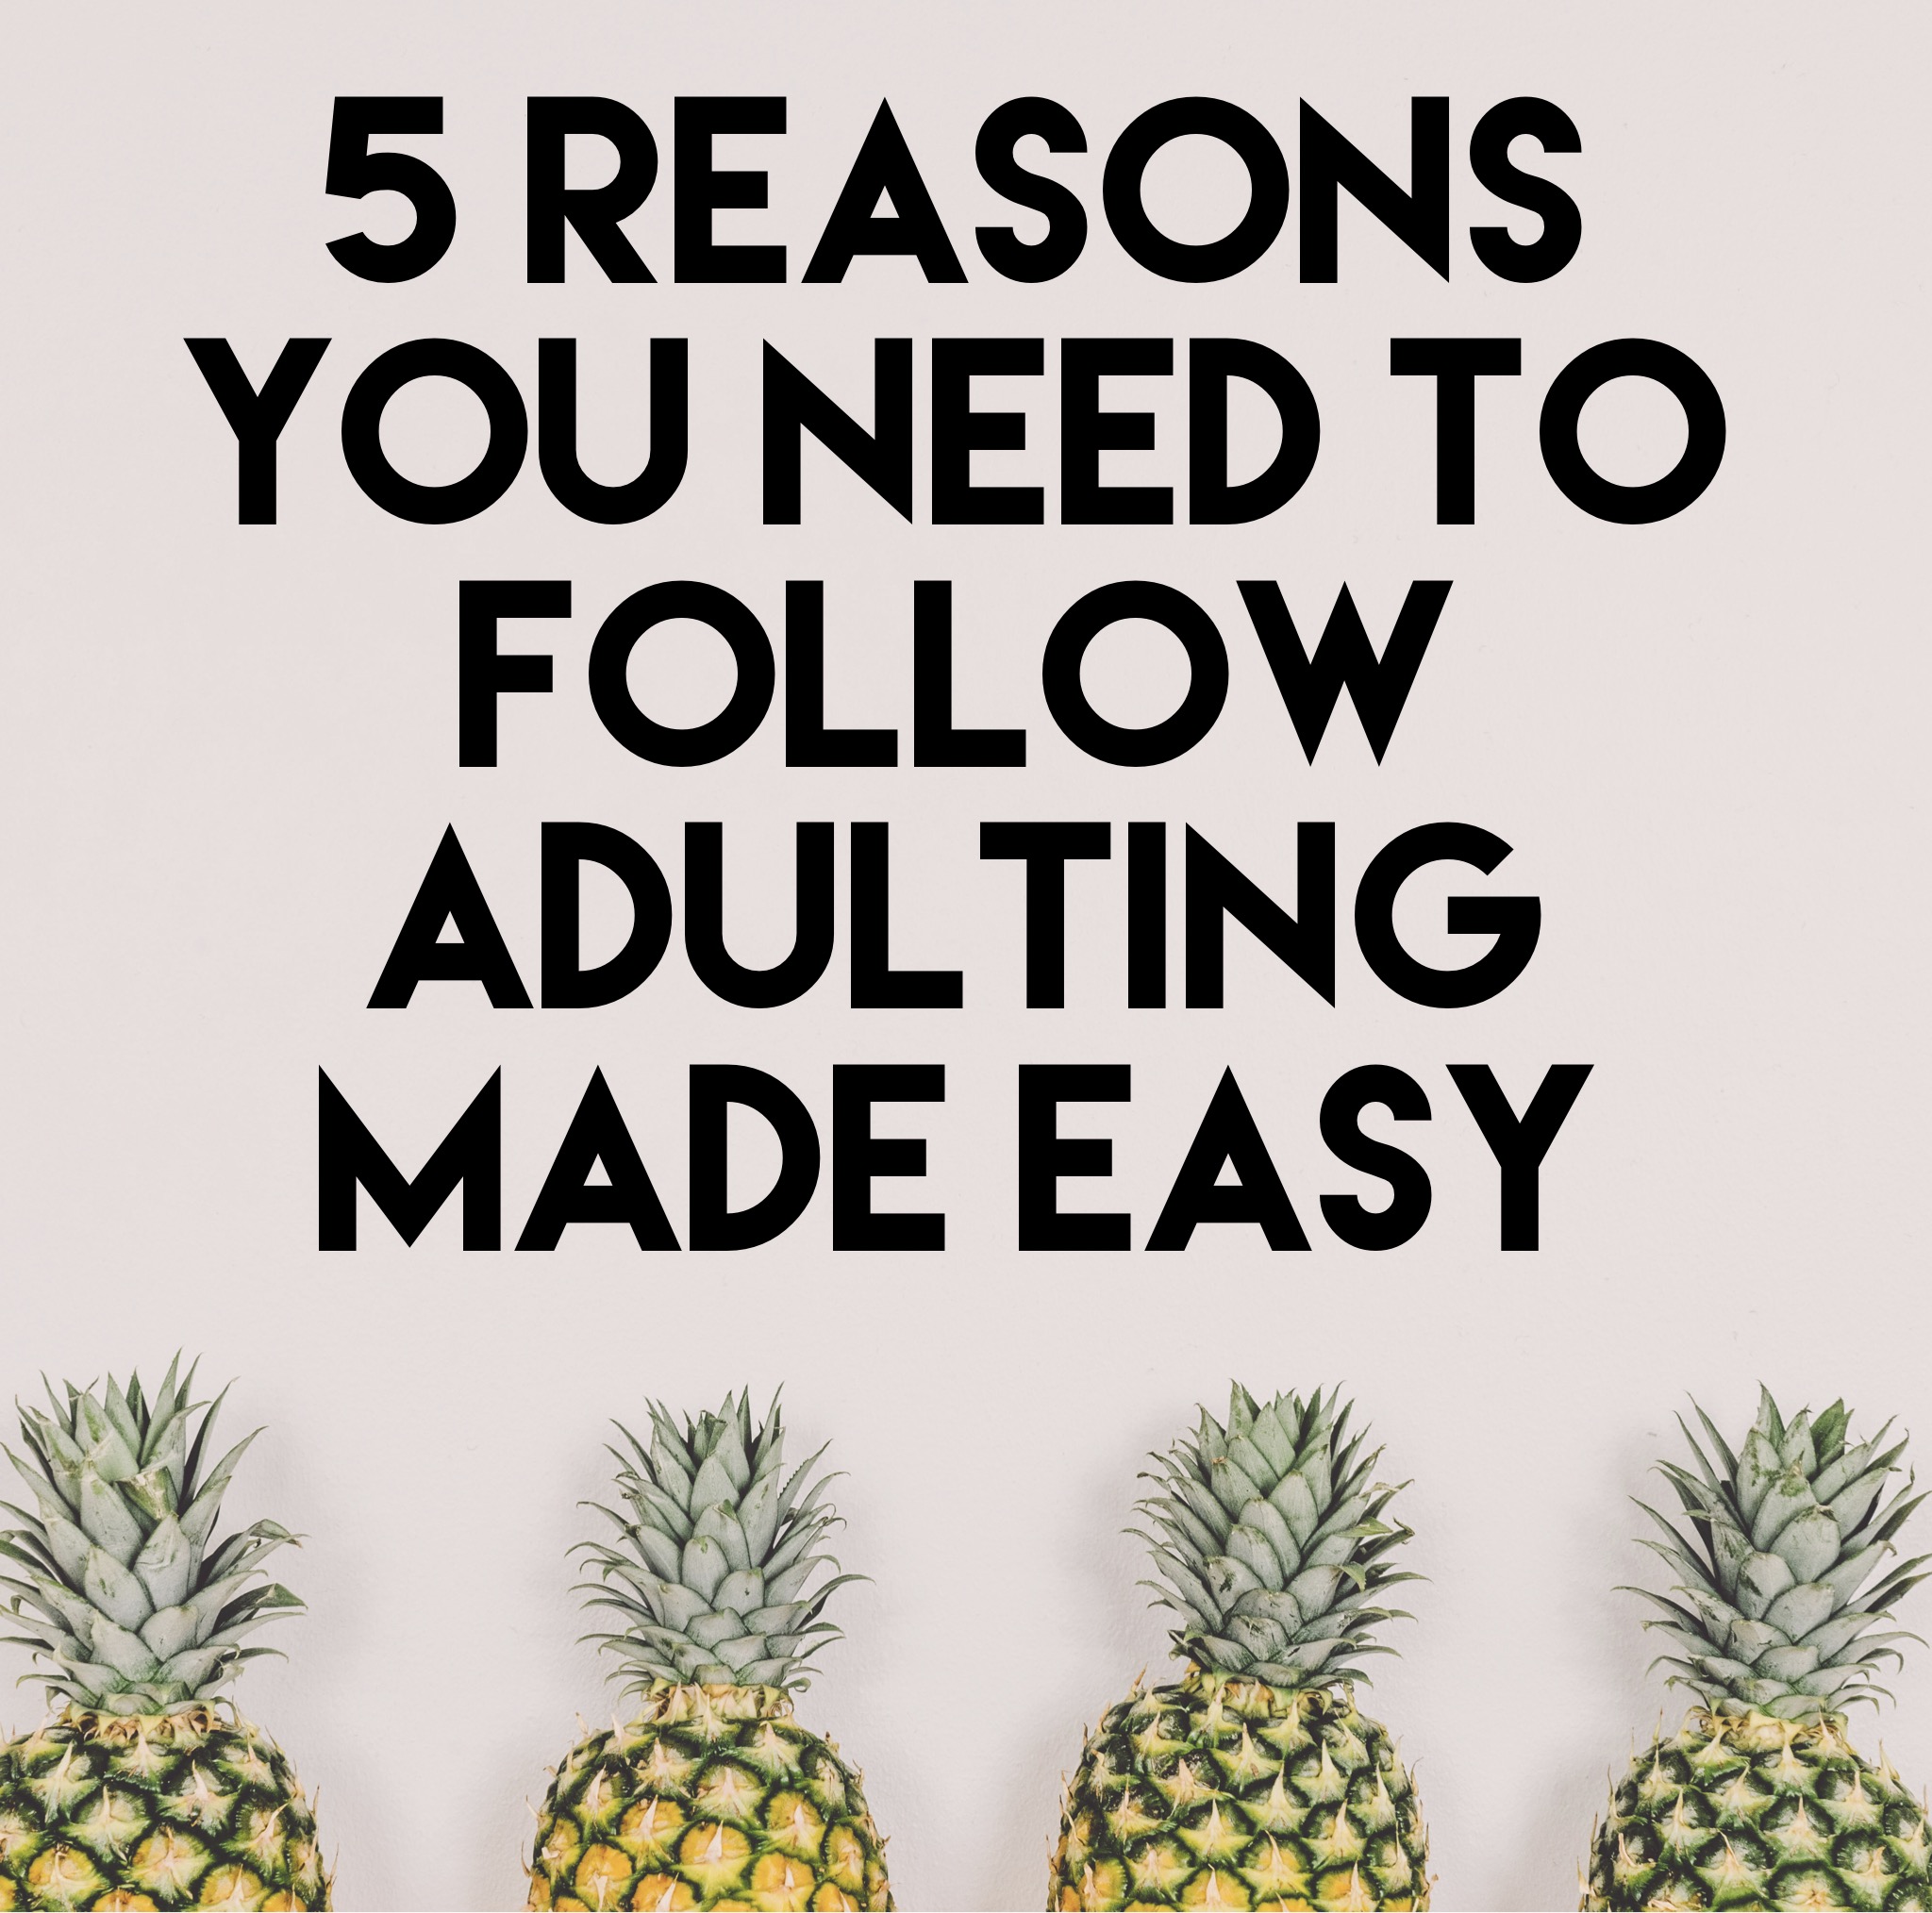 BLOG: 5 reasons you need to follow adulting made easy special education resources